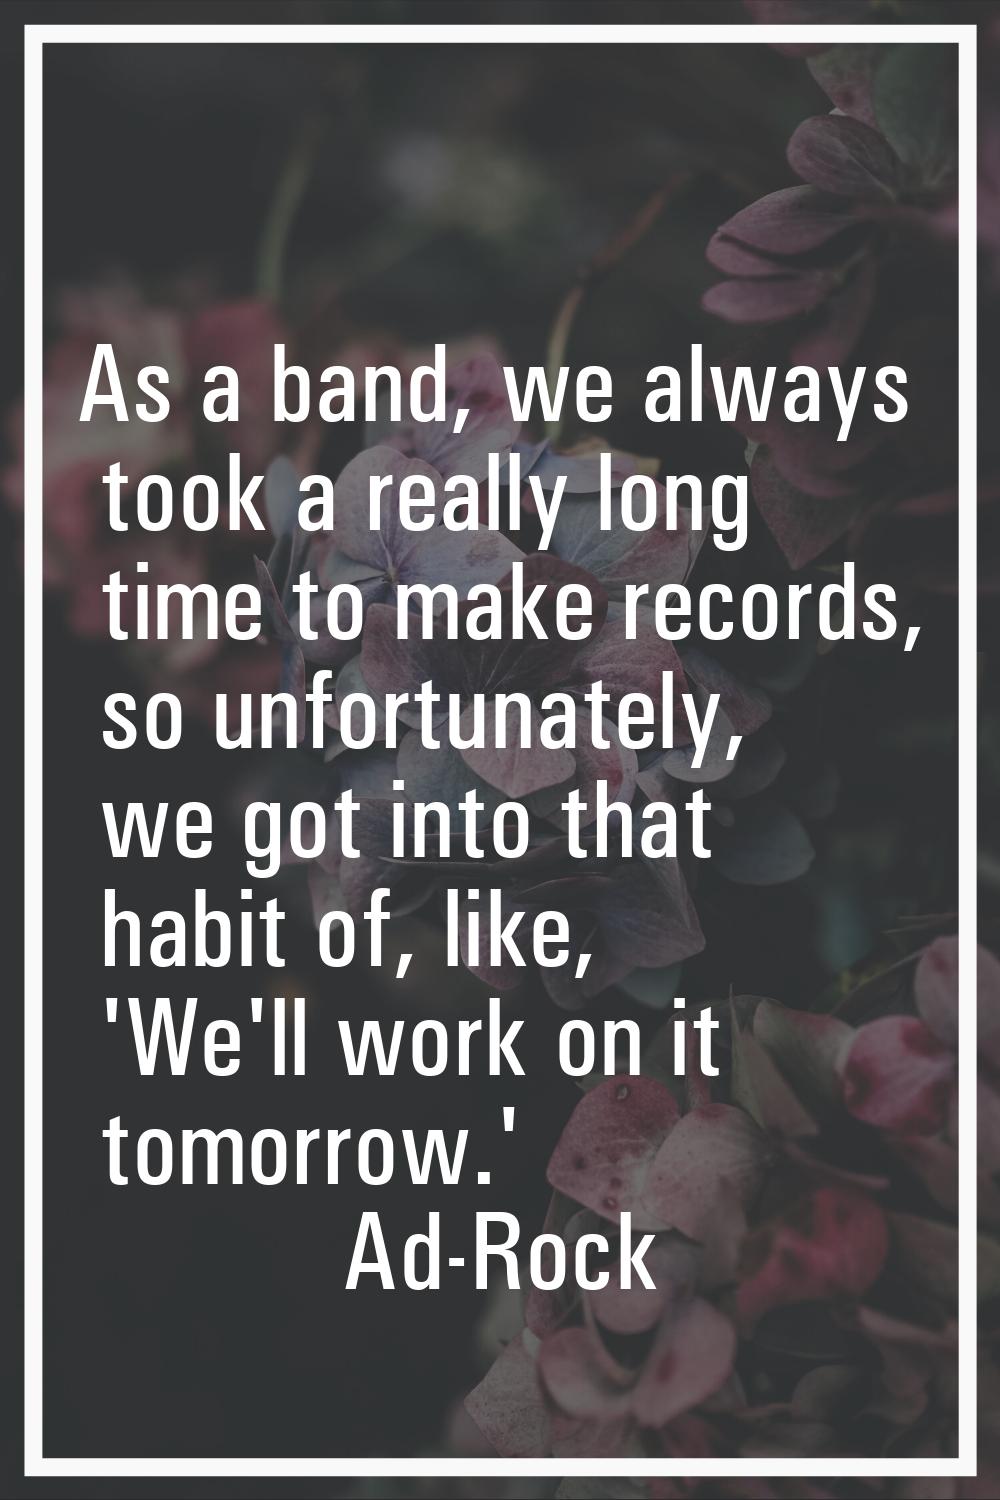 As a band, we always took a really long time to make records, so unfortunately, we got into that ha